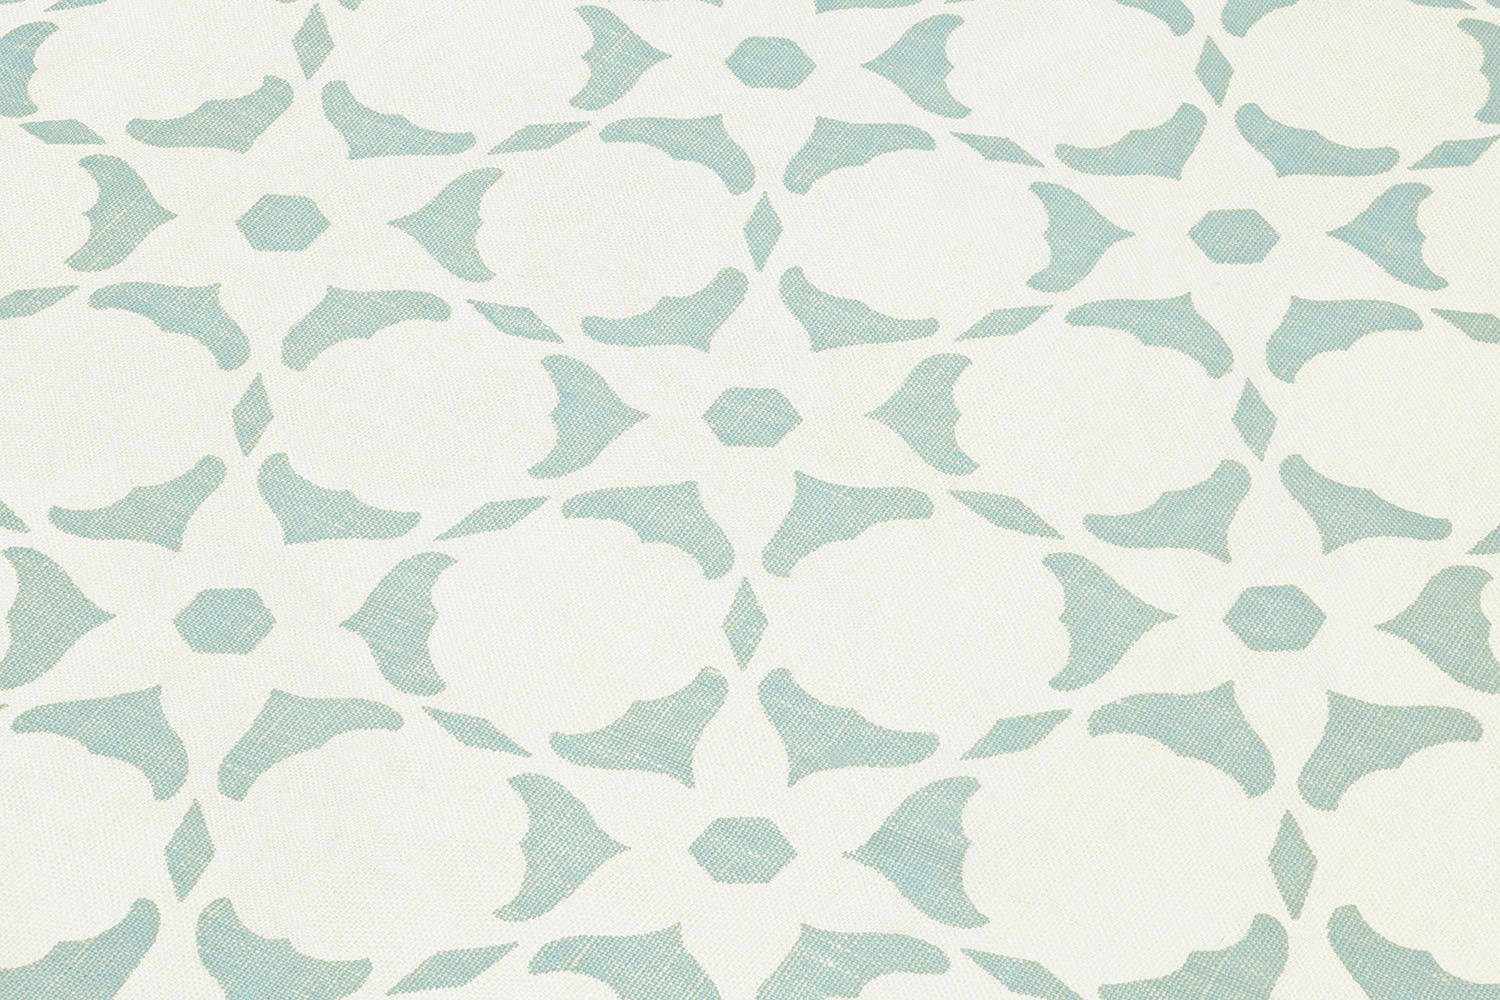 Fabric yardage in a floral lattice print in turquoise on a white field.